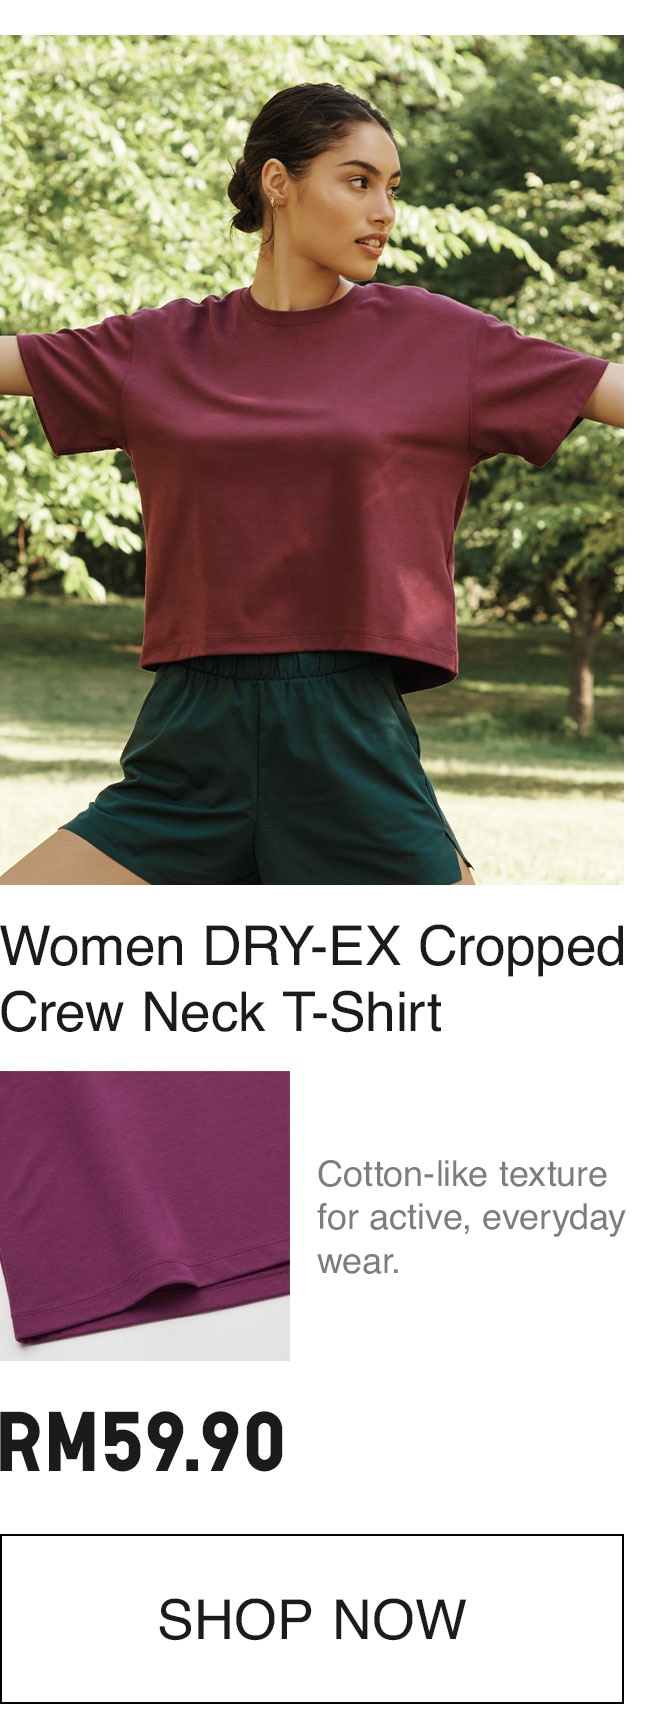 DRY-EX CROPPED T-SHIRT